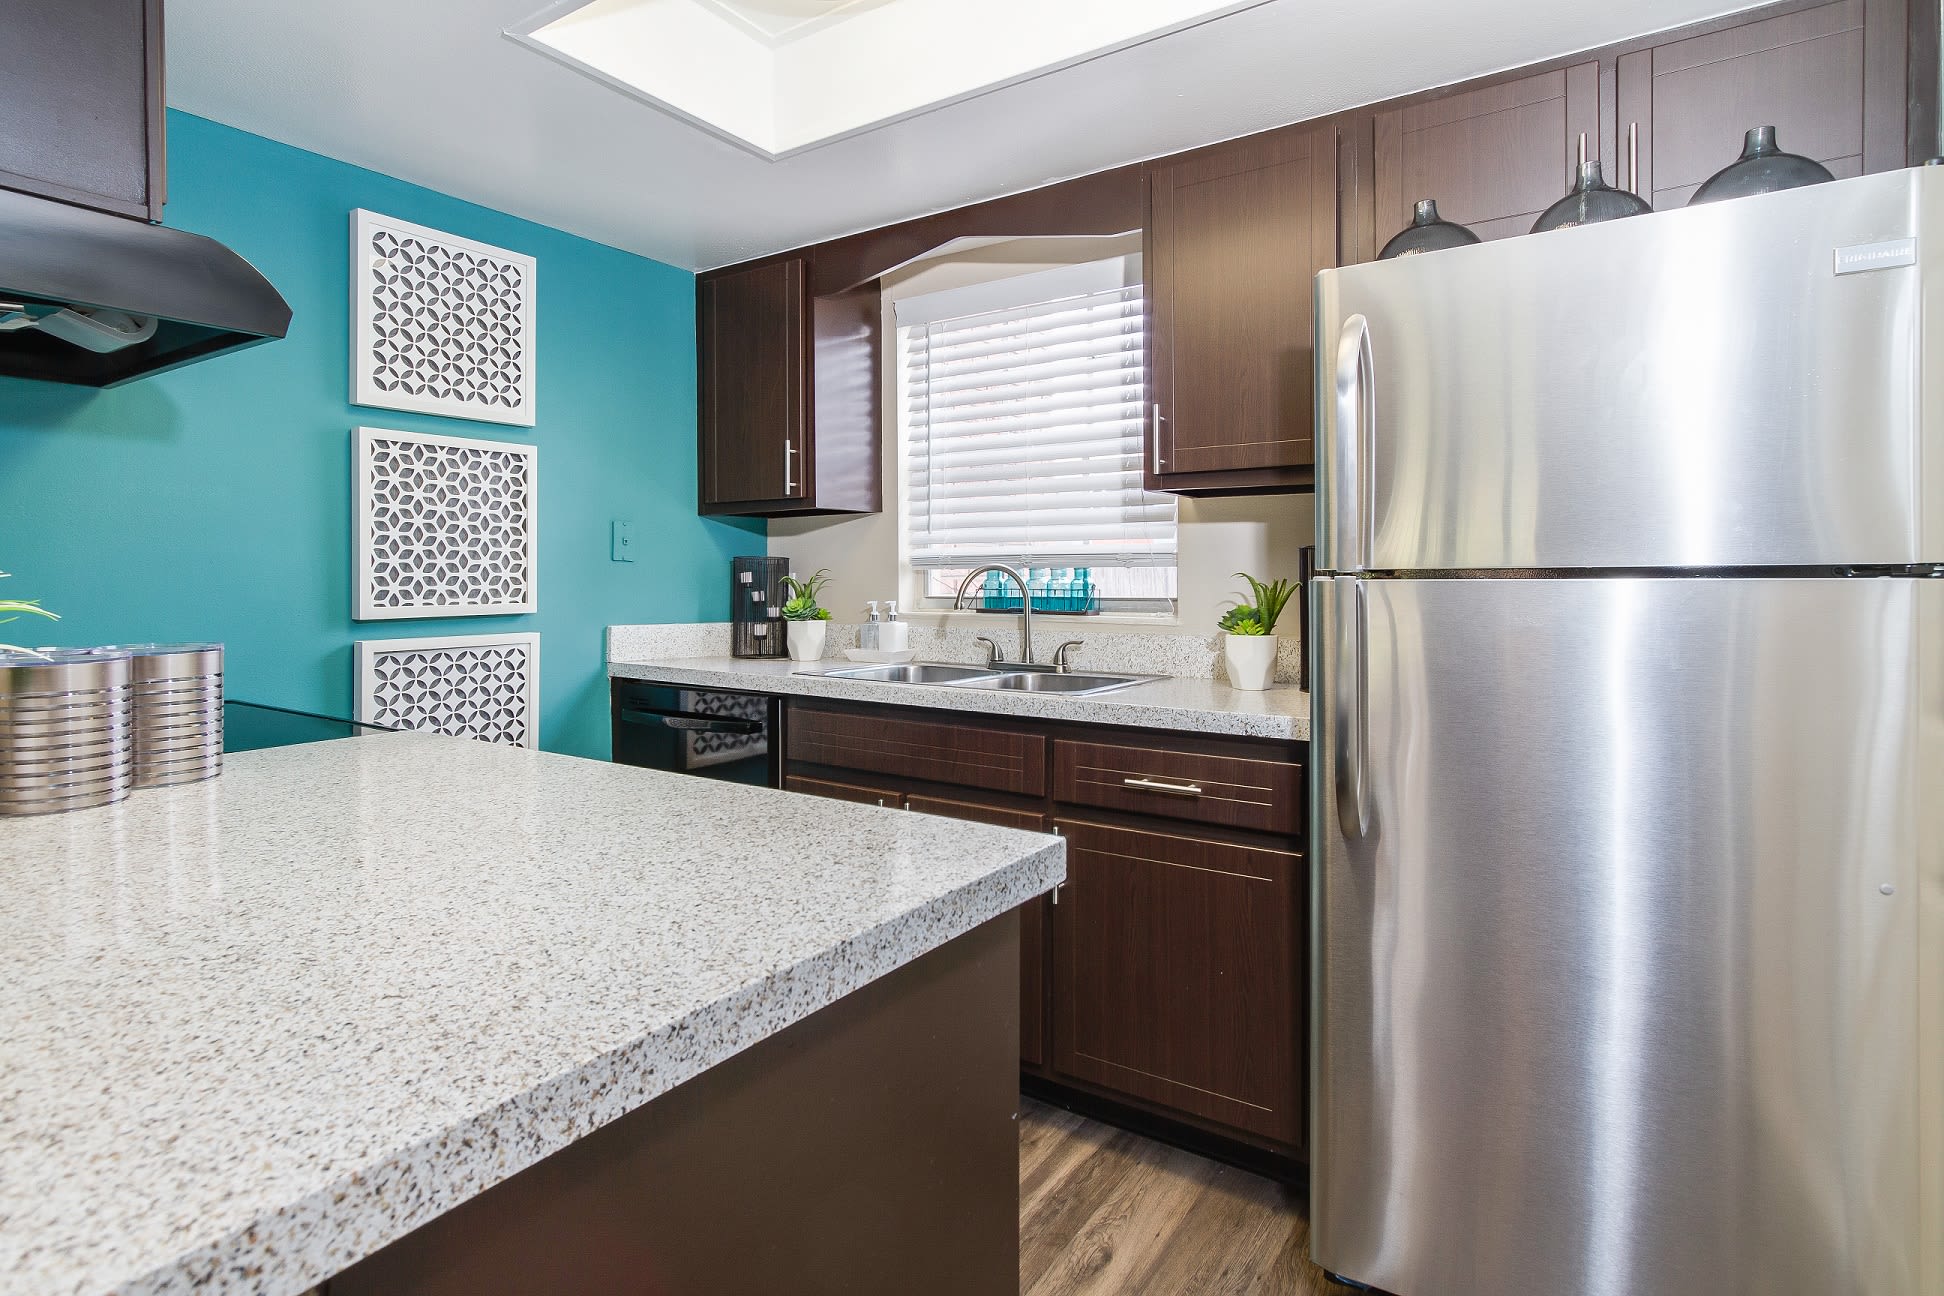 Fully equipped kitchen with stainless steel appliances at Central Place at Winter Park in Winter Park, Florida